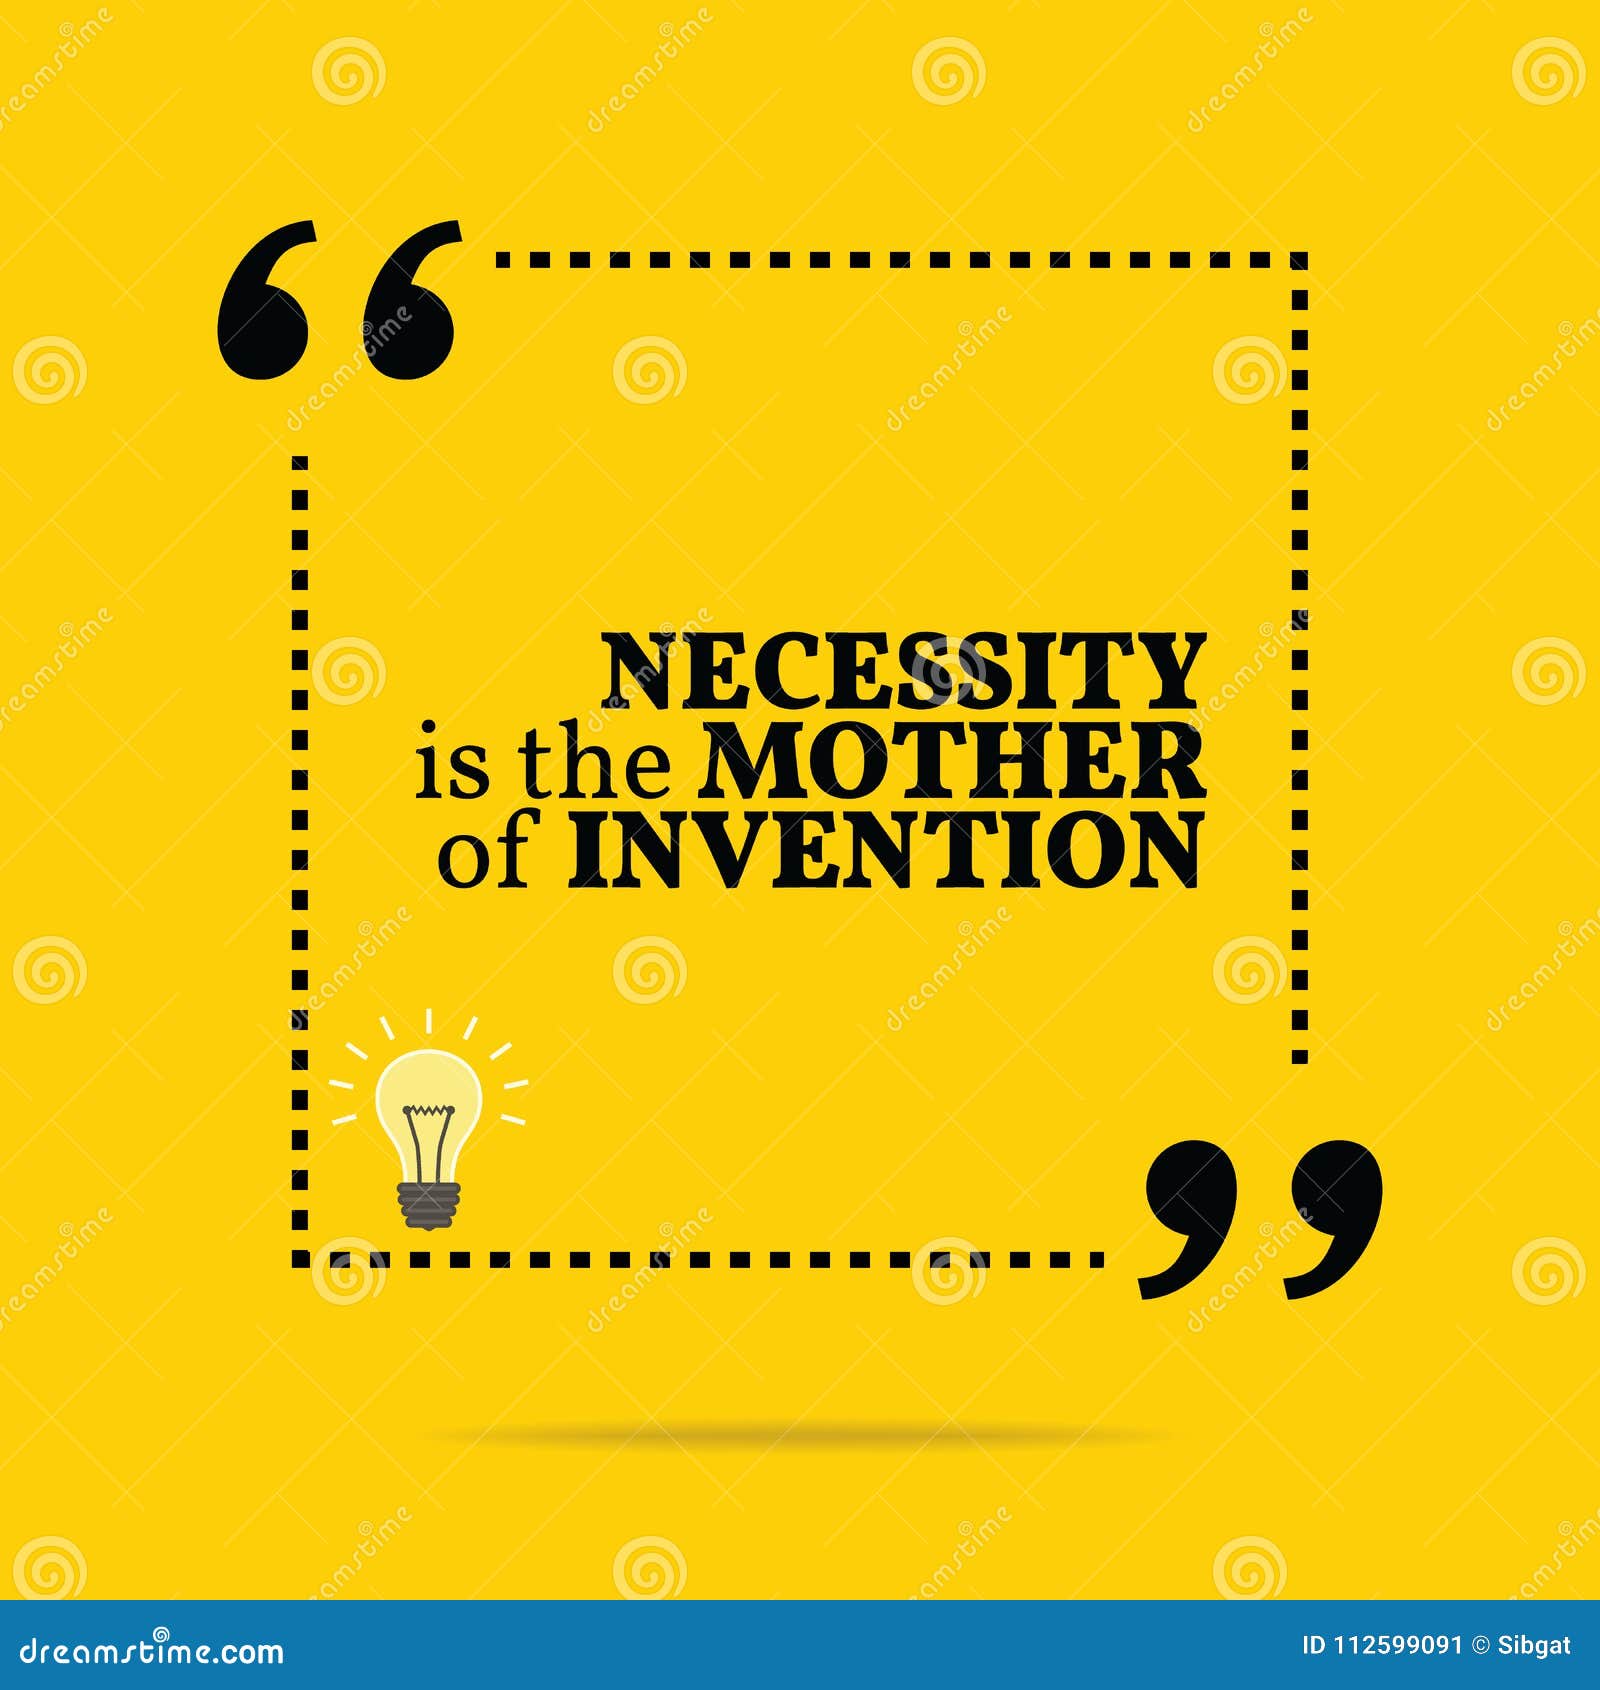 Essay on necessity is the mother of invention